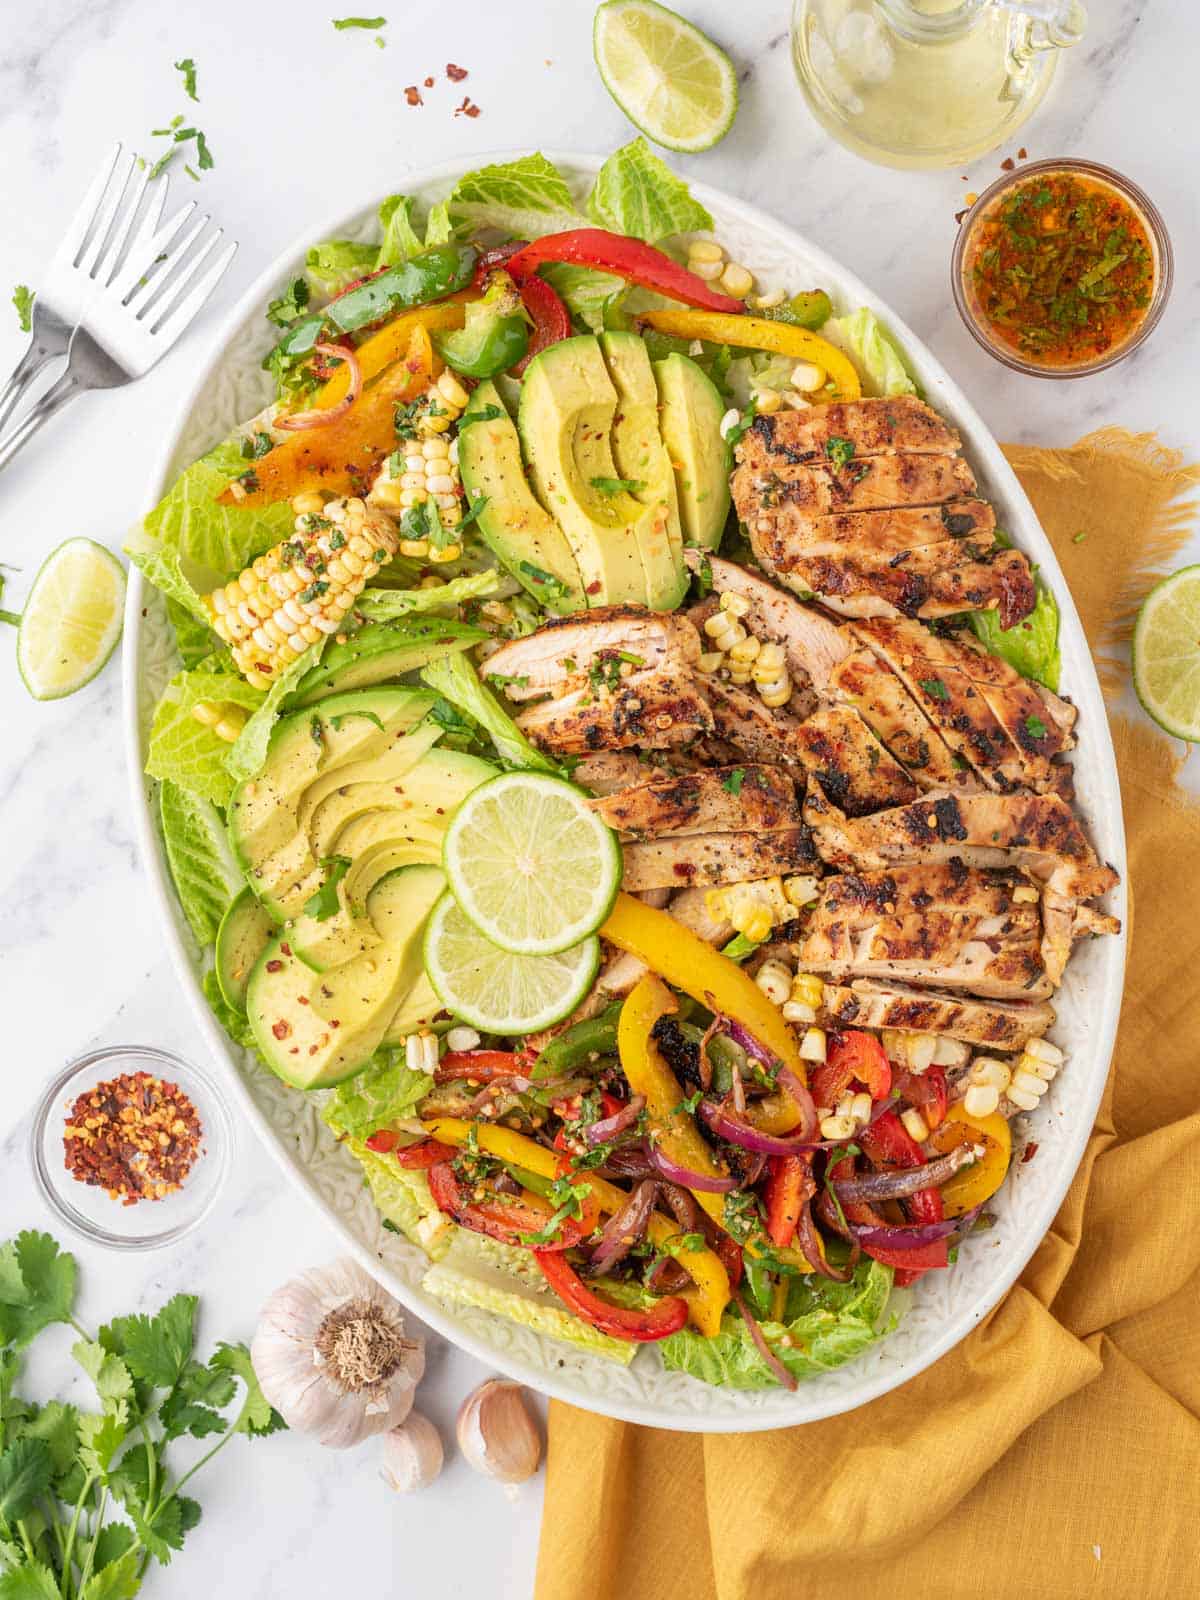 Fiesta chicken salad platter with forks on the side.